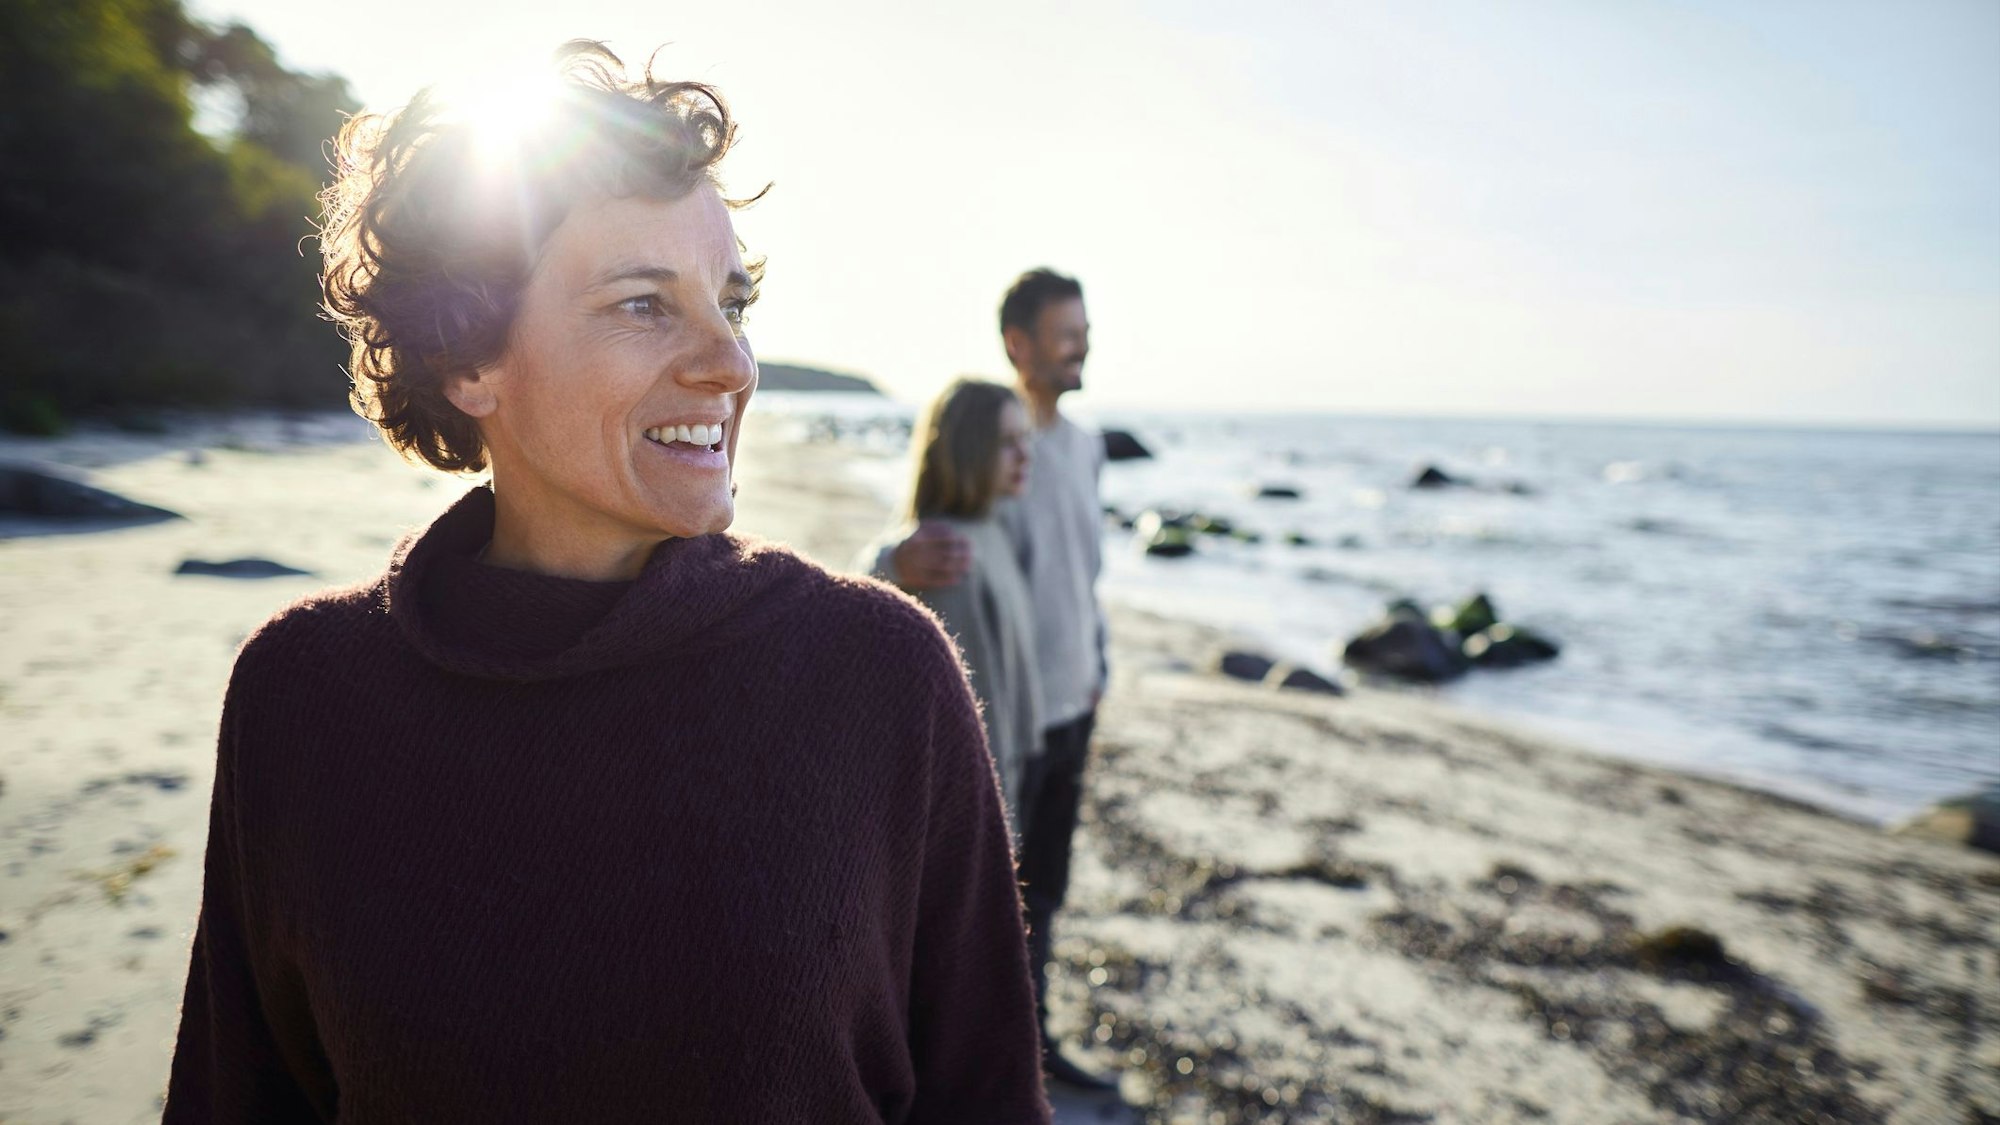 Smiling woman on the beach with family in background, Foto: Getty Images/Oliver Rossi